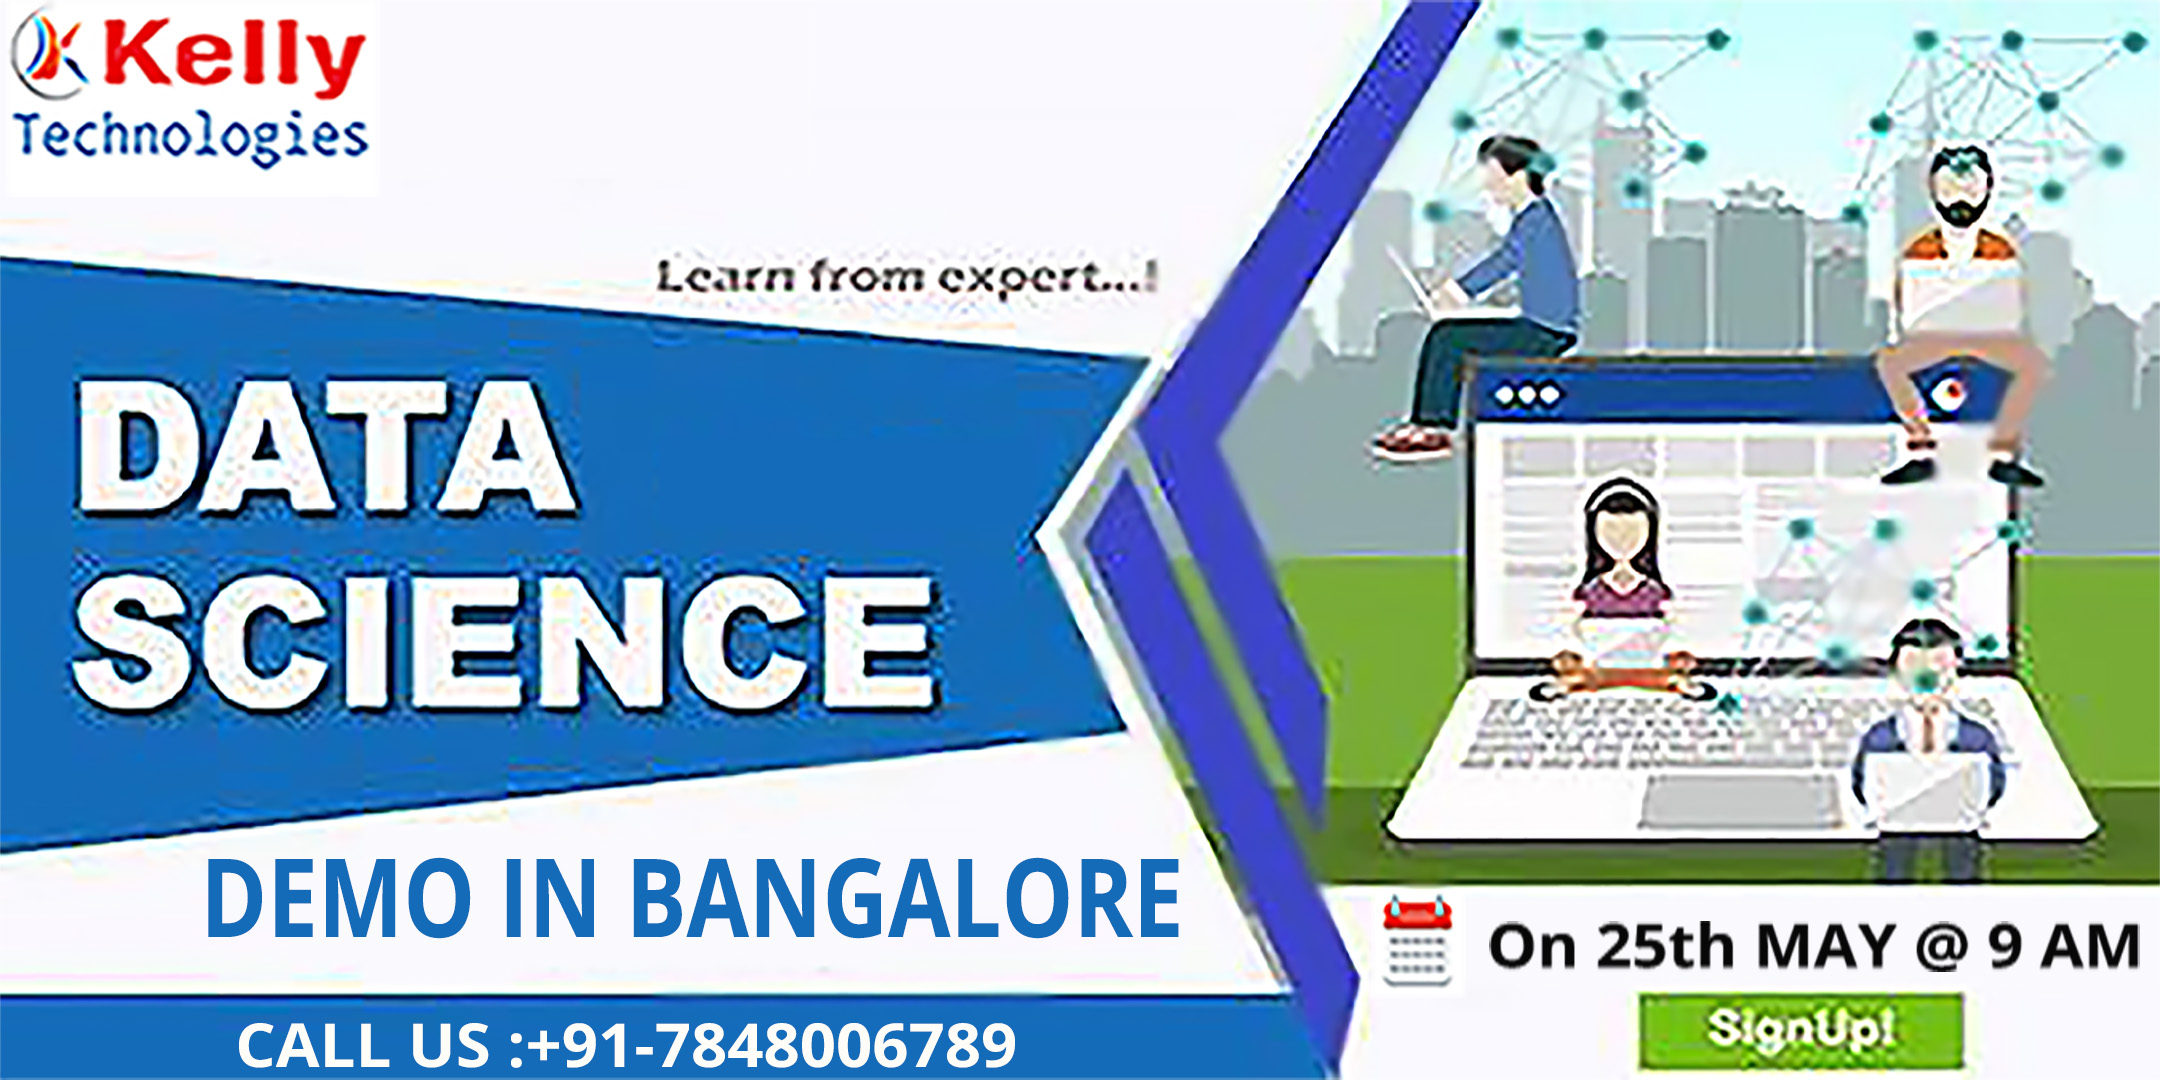 Free Demo On Data Science Training-Exclusive Free Analytics Demo By Experts At Kelly Technologies Scheduled On 25th May At 9 AM, Bangalore, Karnataka, India